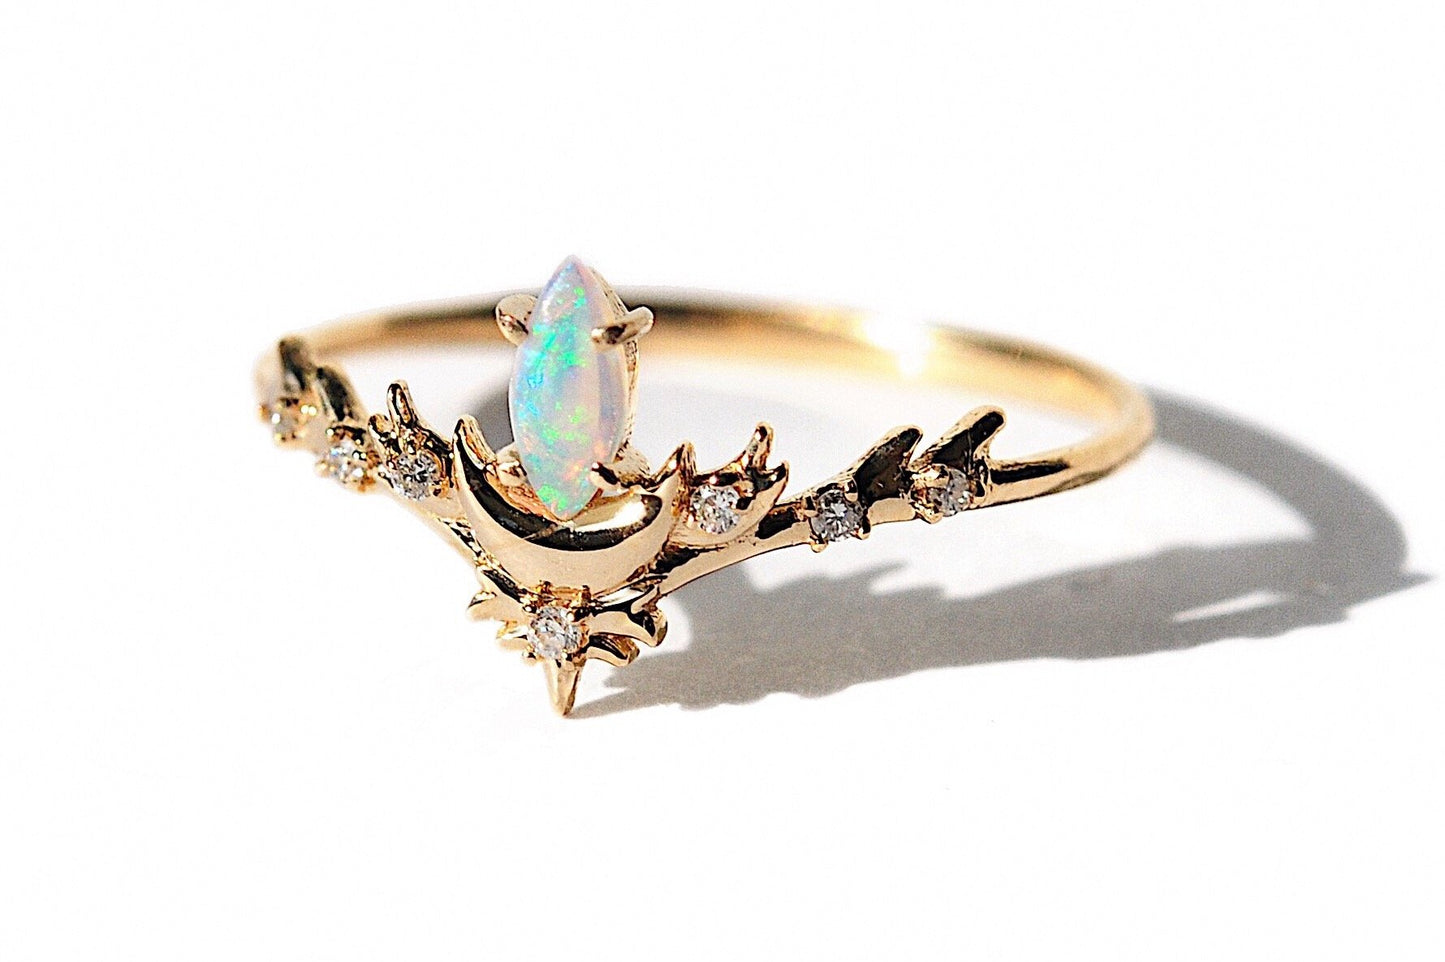 Opal Marquise Luna Diamond Ring close up on white background.